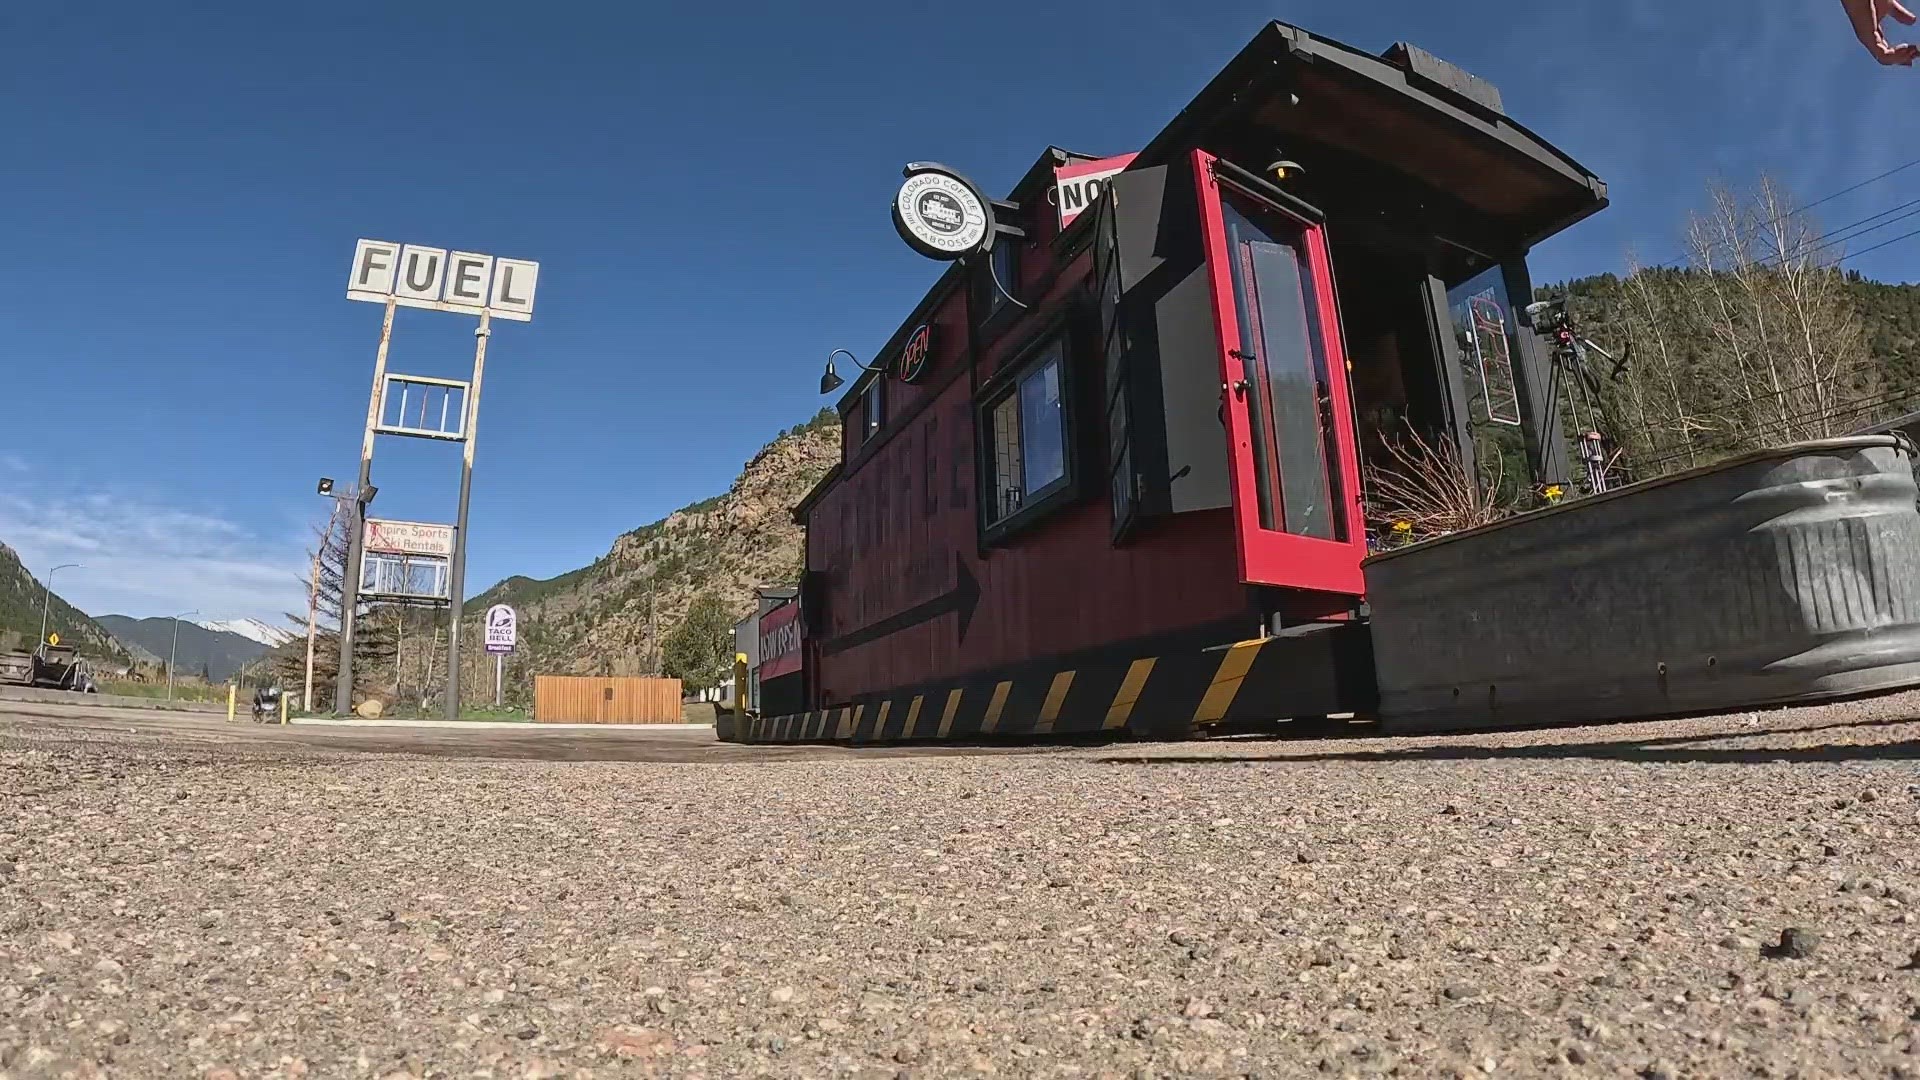 The little red caboose, which is mostly built for drive-thru business sits in a parking lot of I-70 in the Dumont/Downieville area.